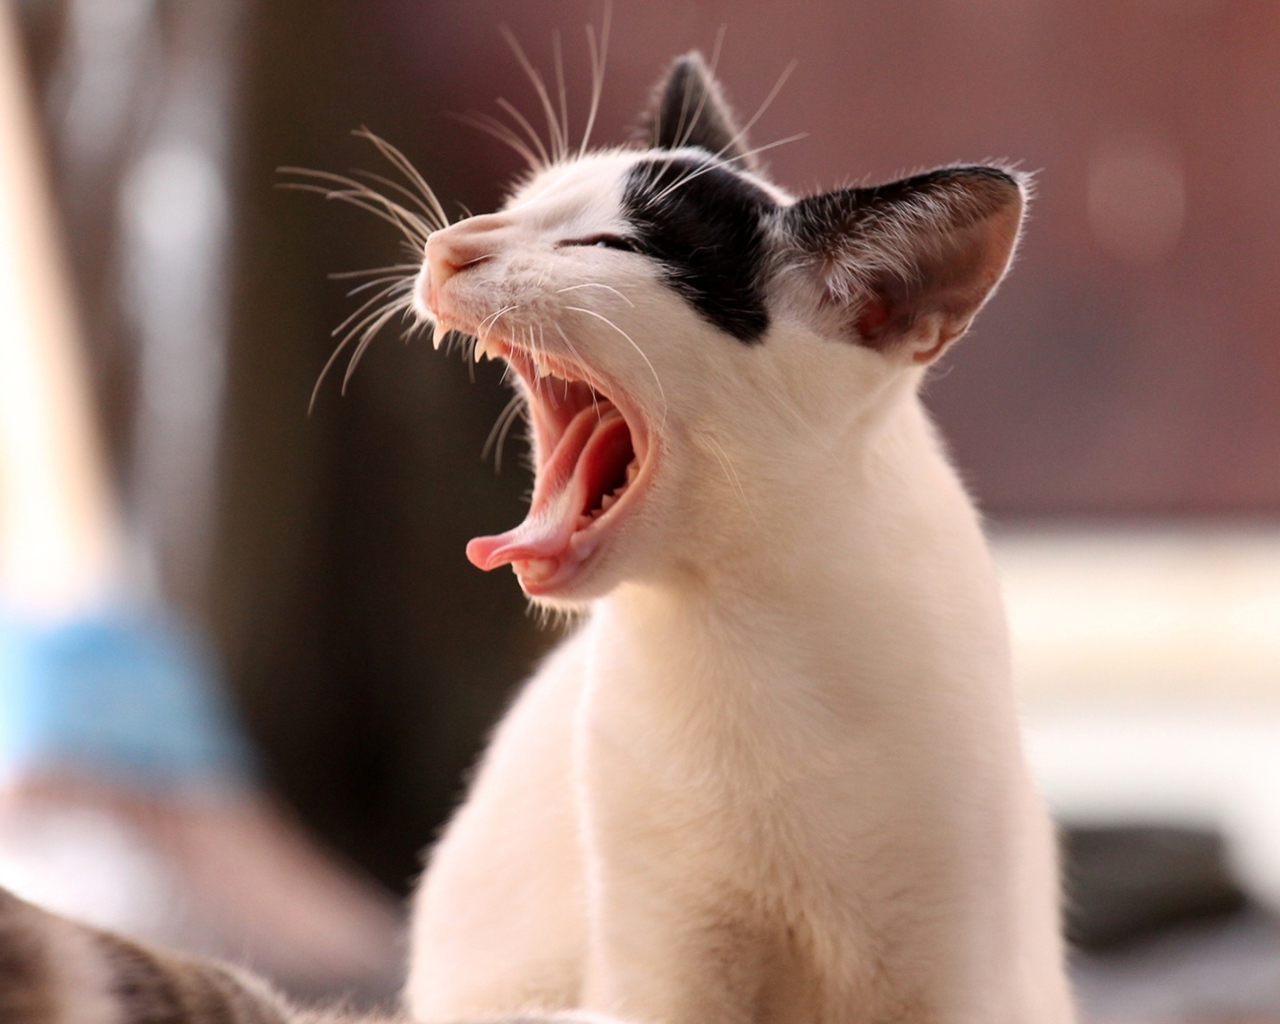 White cat with black spots is yawning